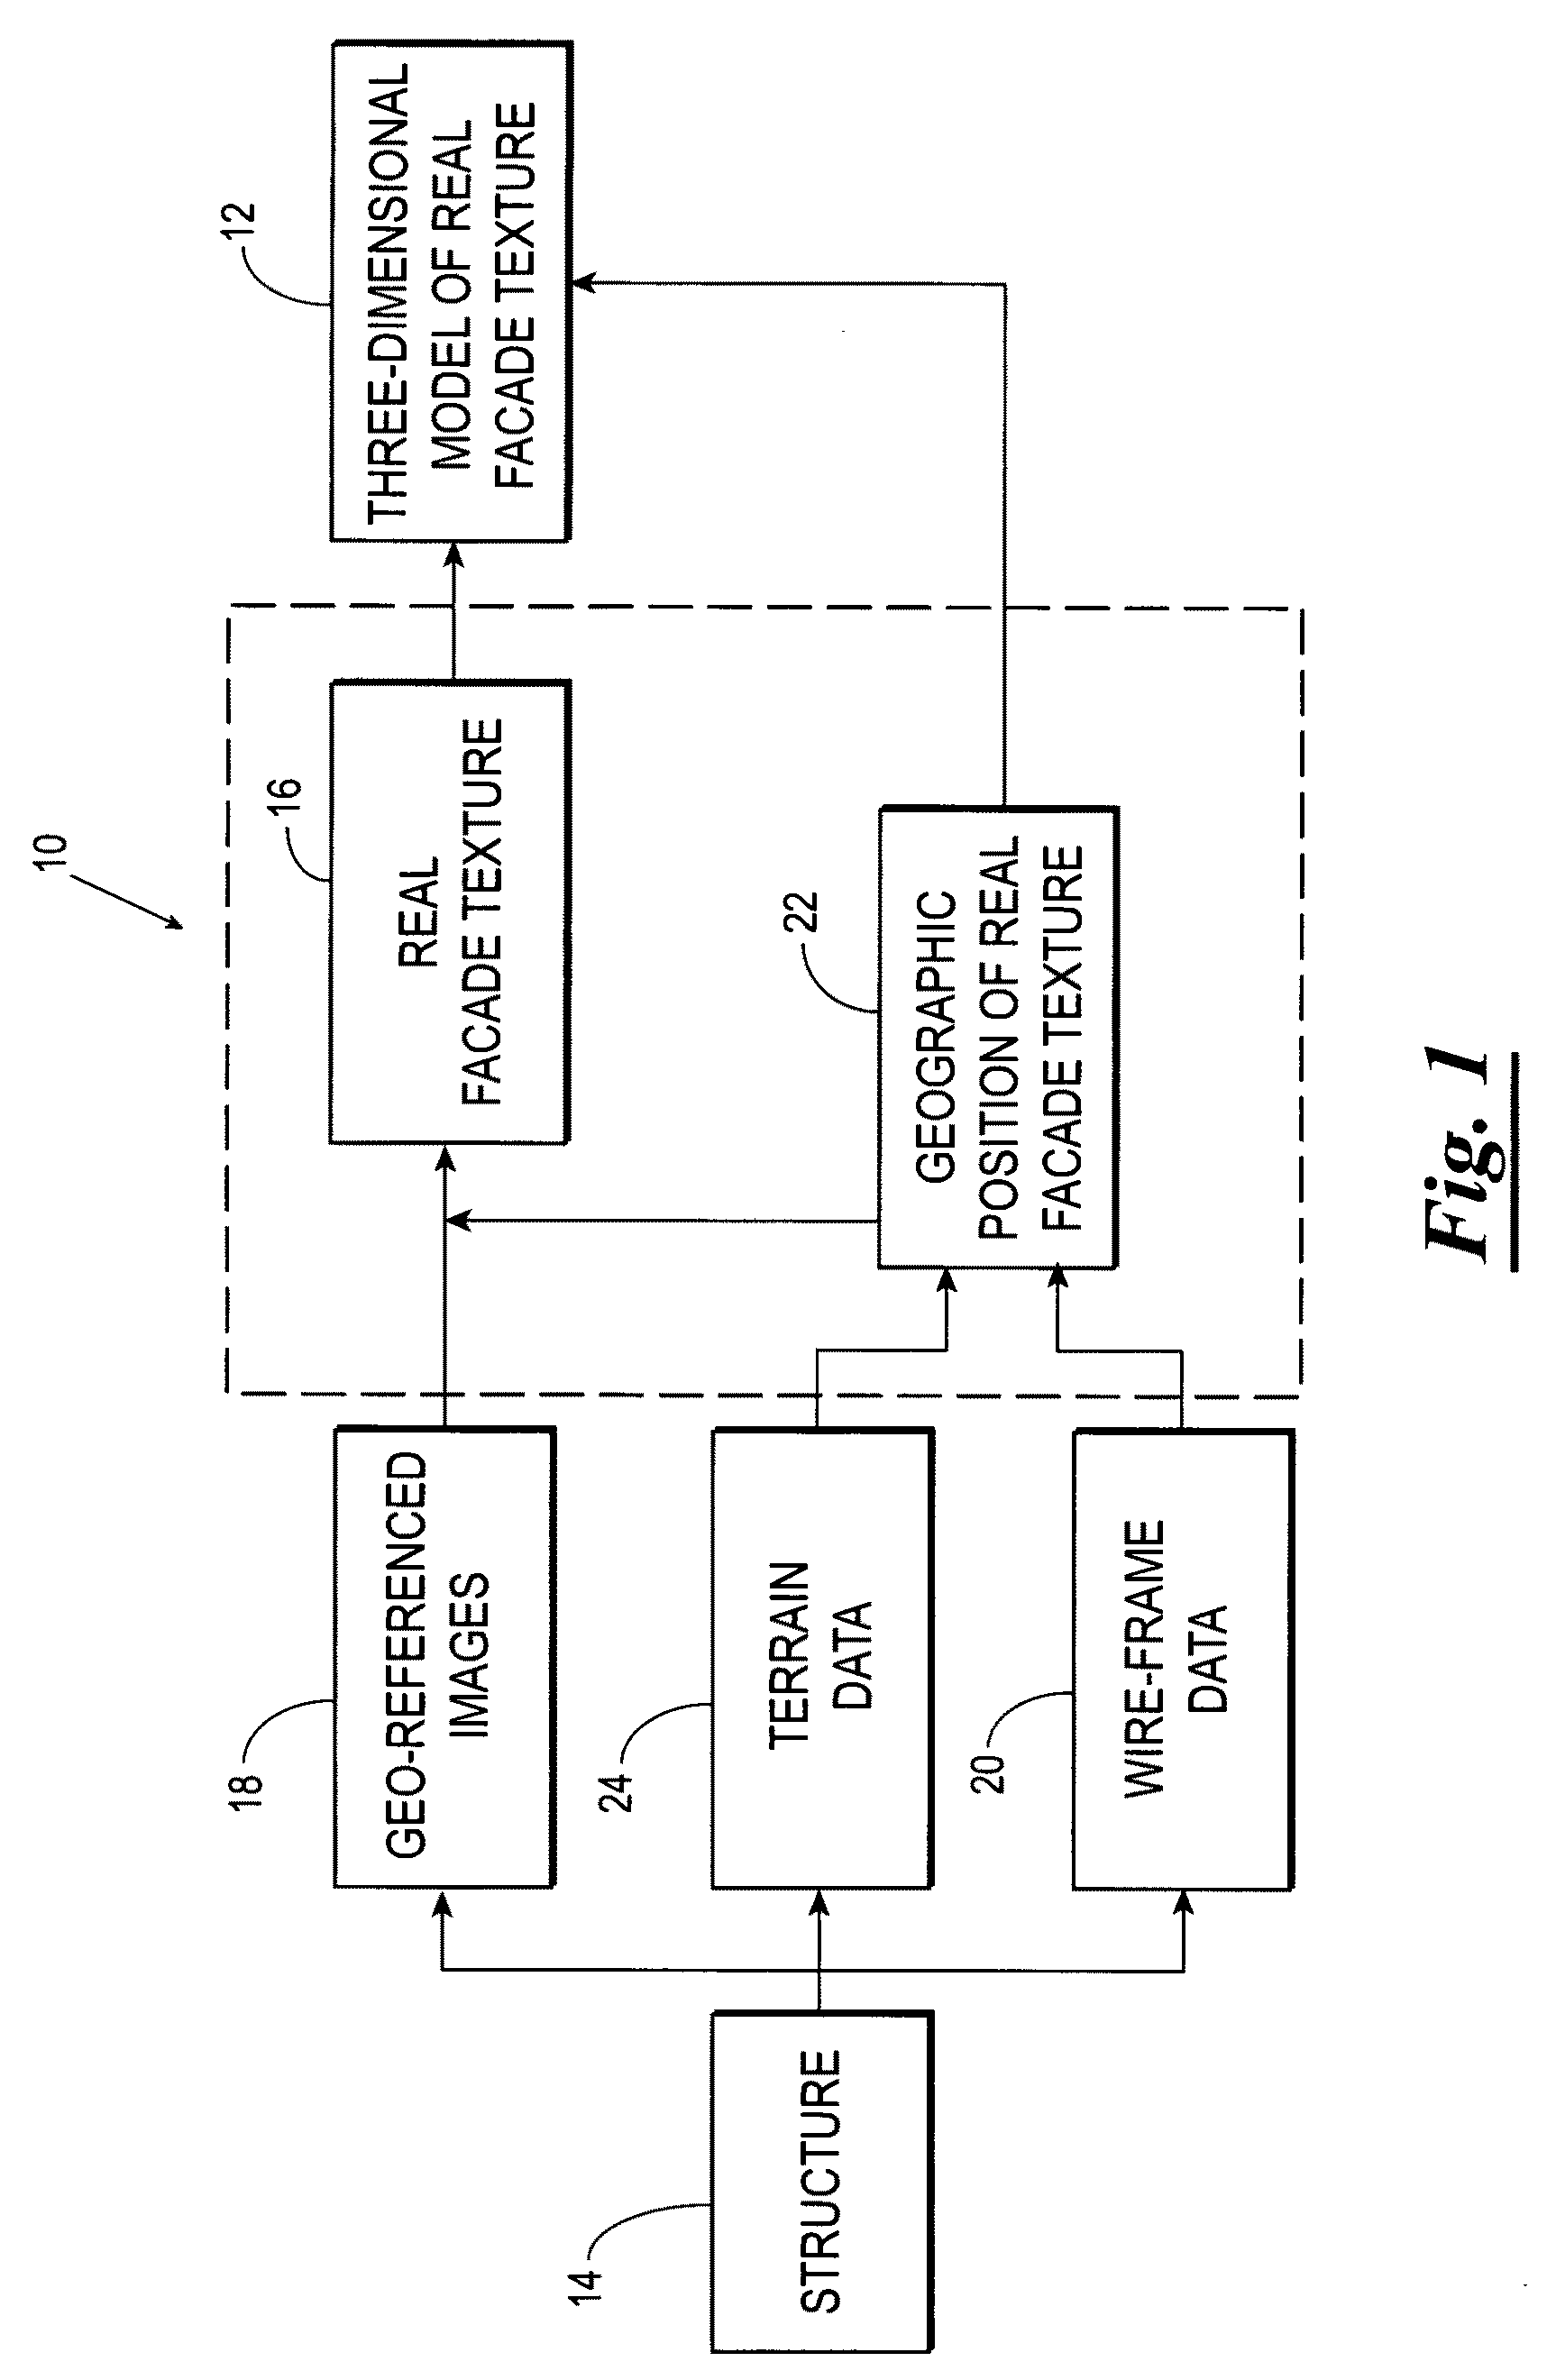 Systems and methods for rapid three-dimensional modeling with real façade texture